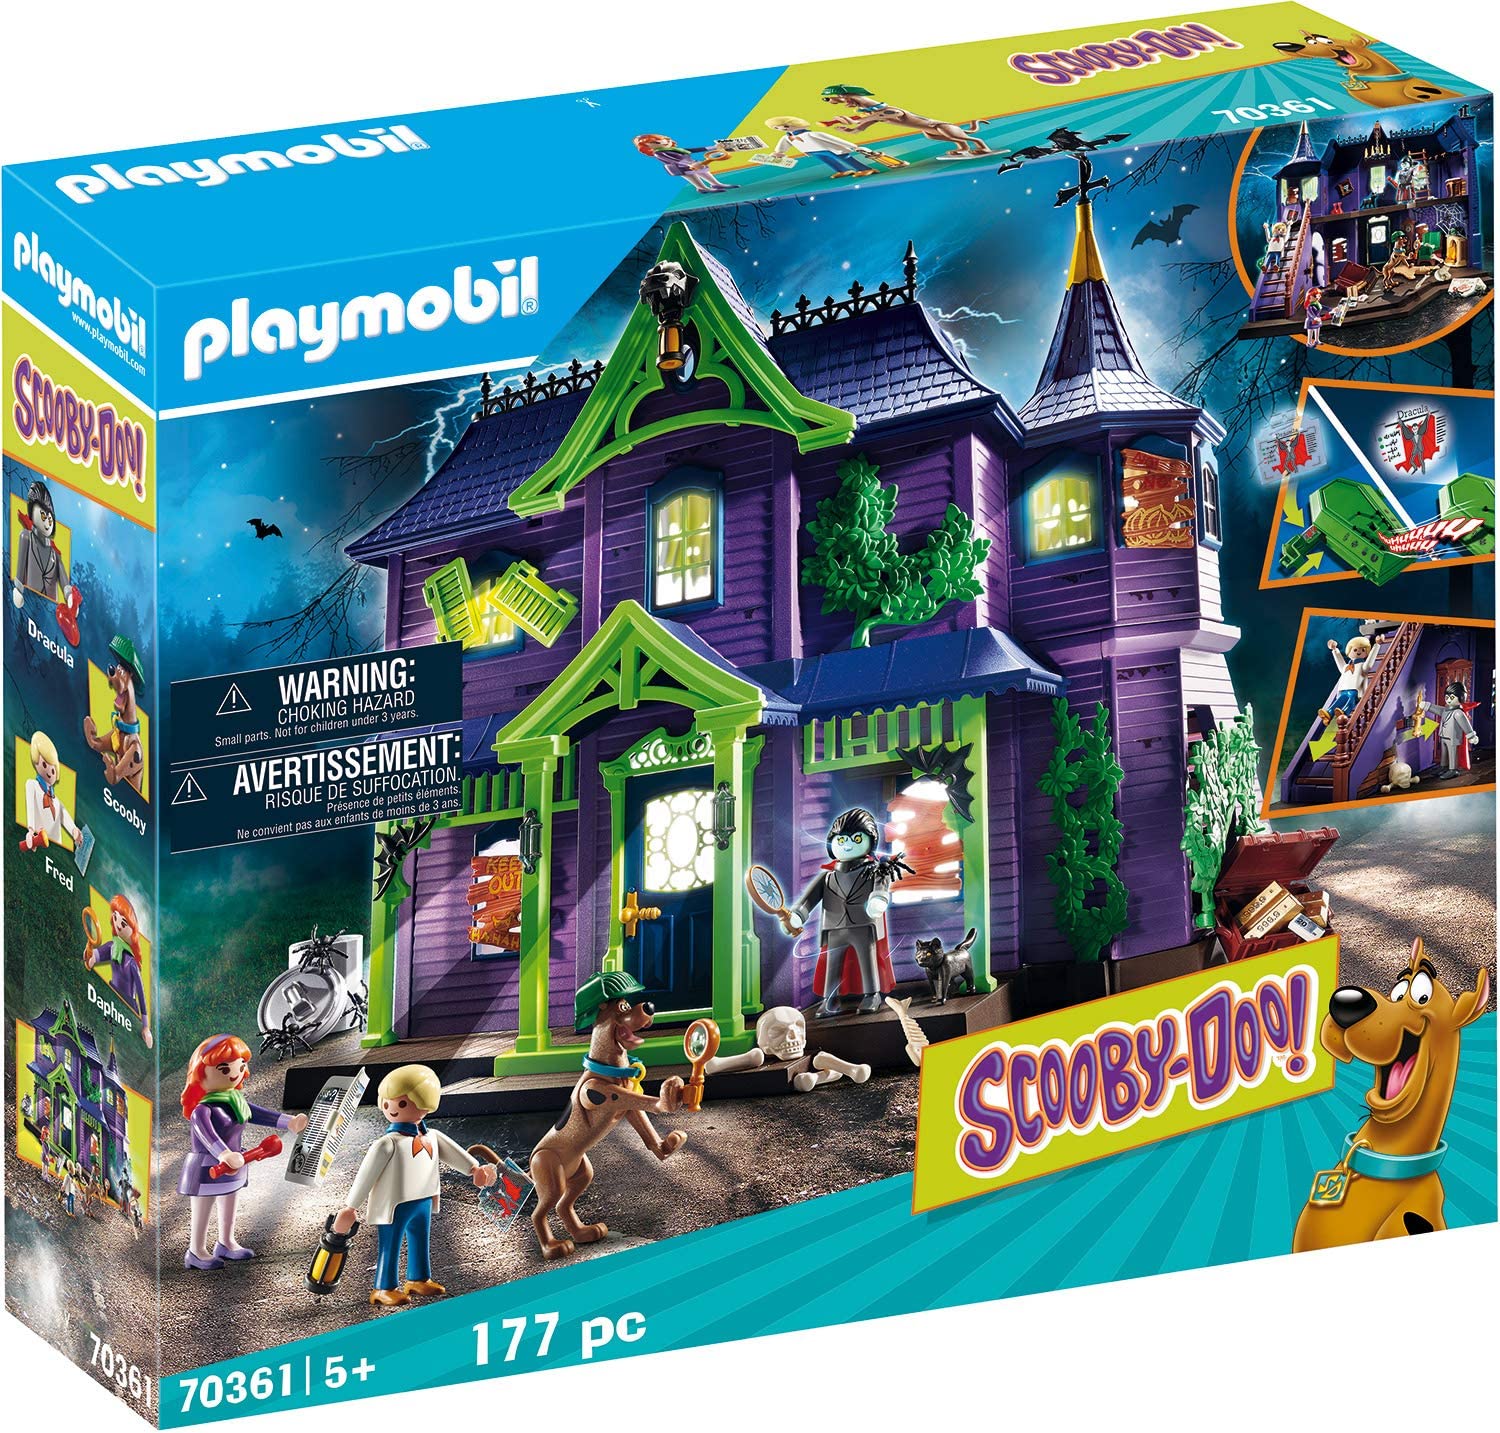 Playmobil 70361 Scooby-Doo Adventure in the ghost house, from age 5